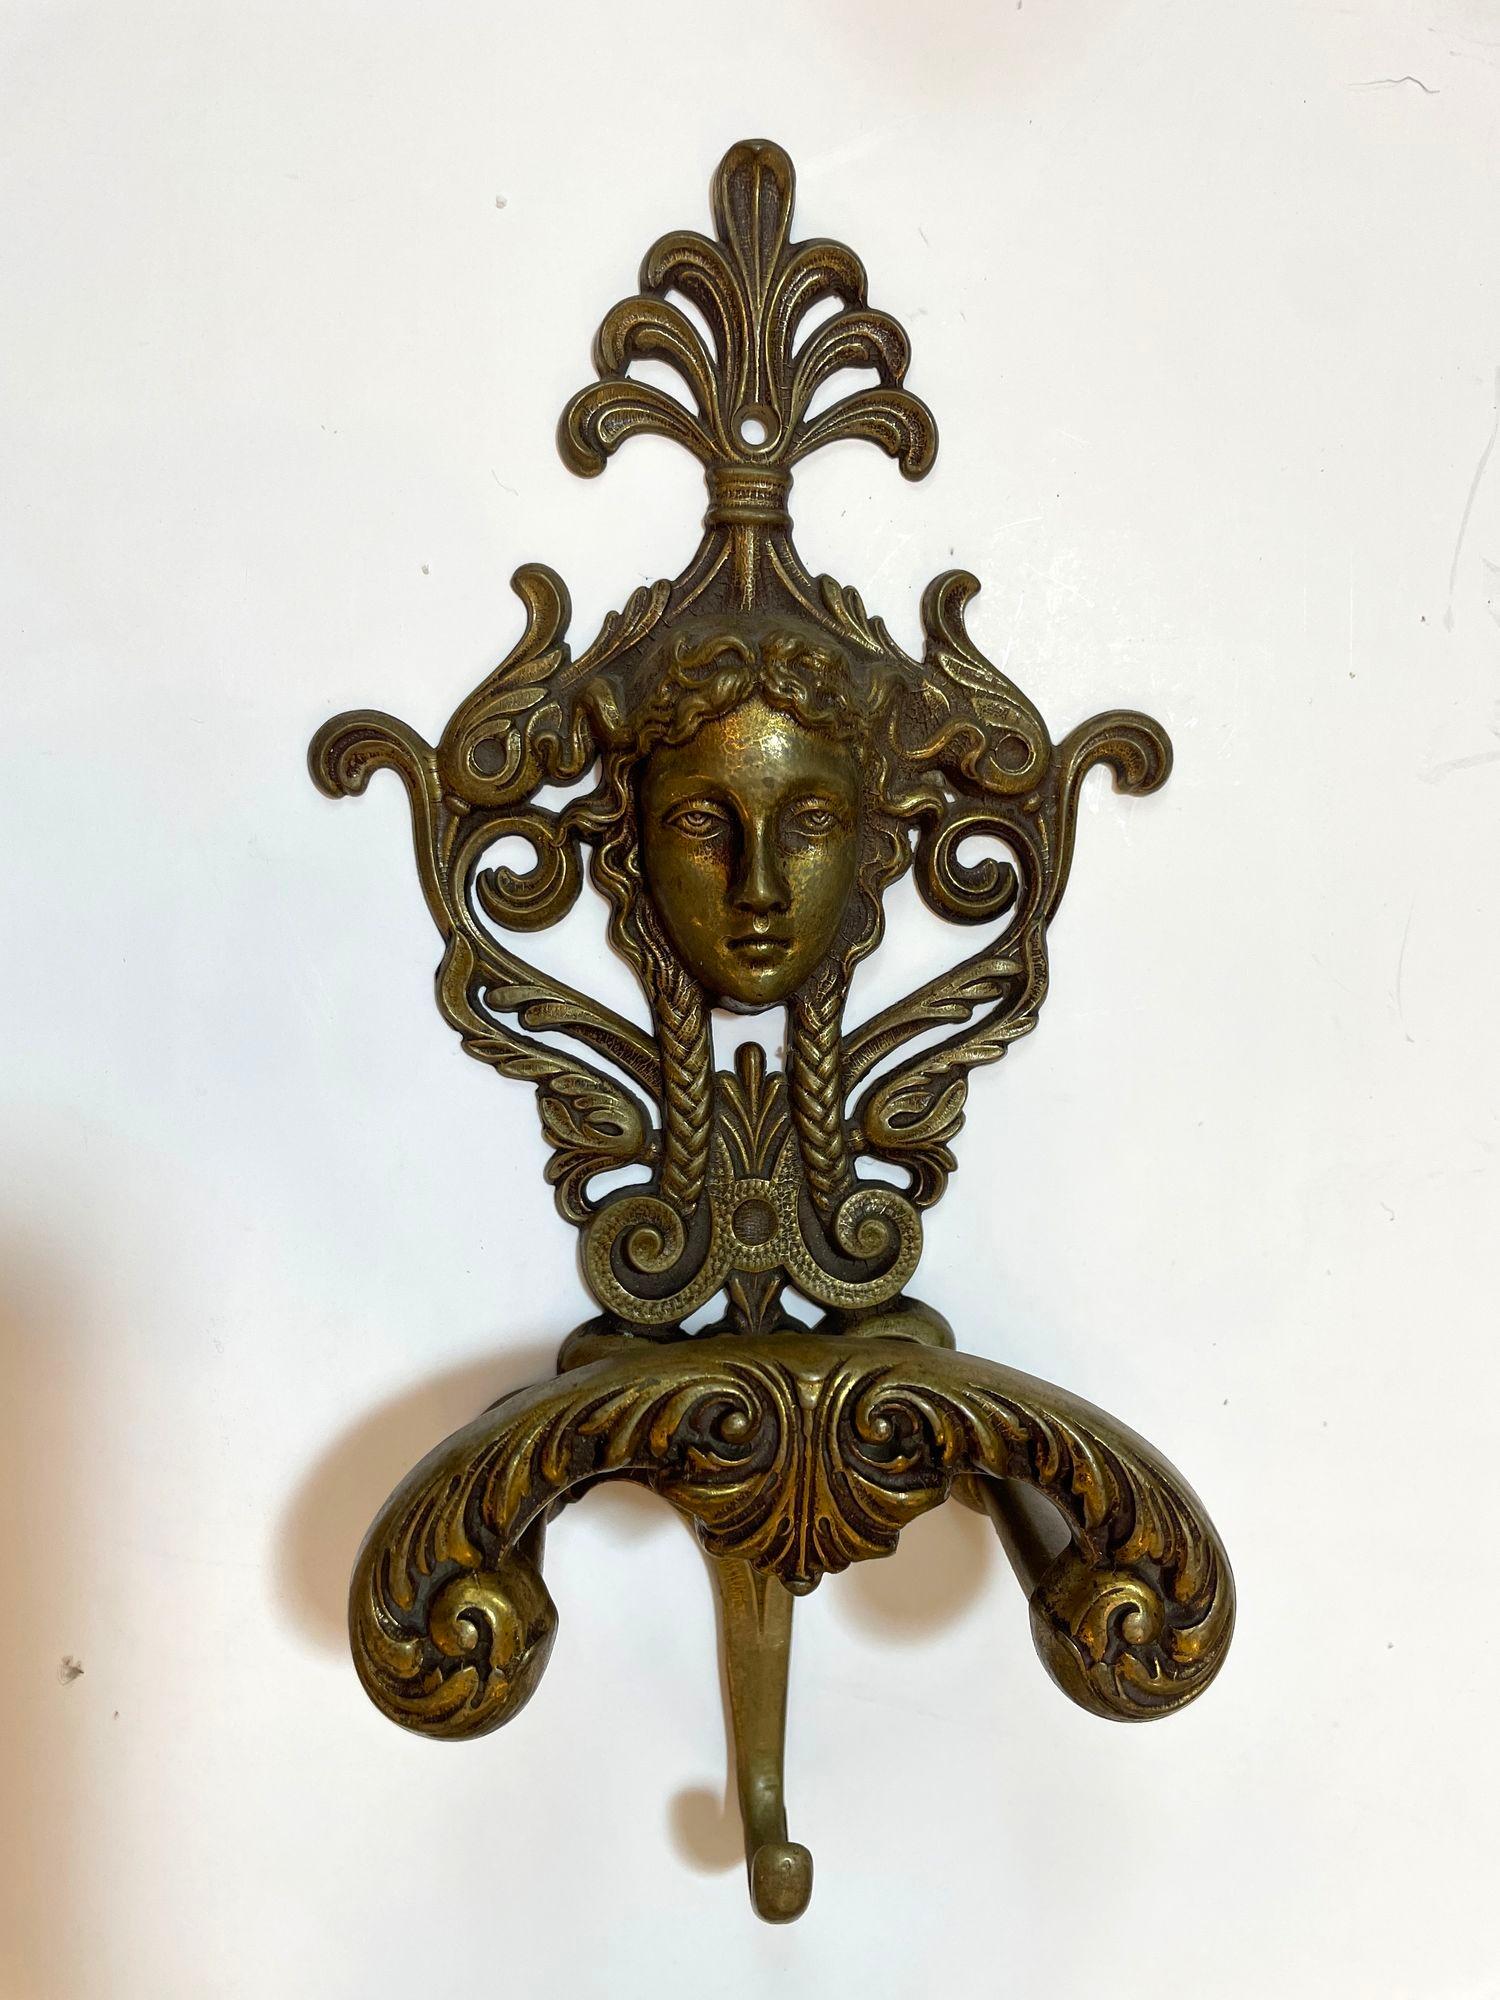 Antique Ornate Italian Figural Architectural Cast Brass Wall Hook Decor Set of 3 For Sale 7